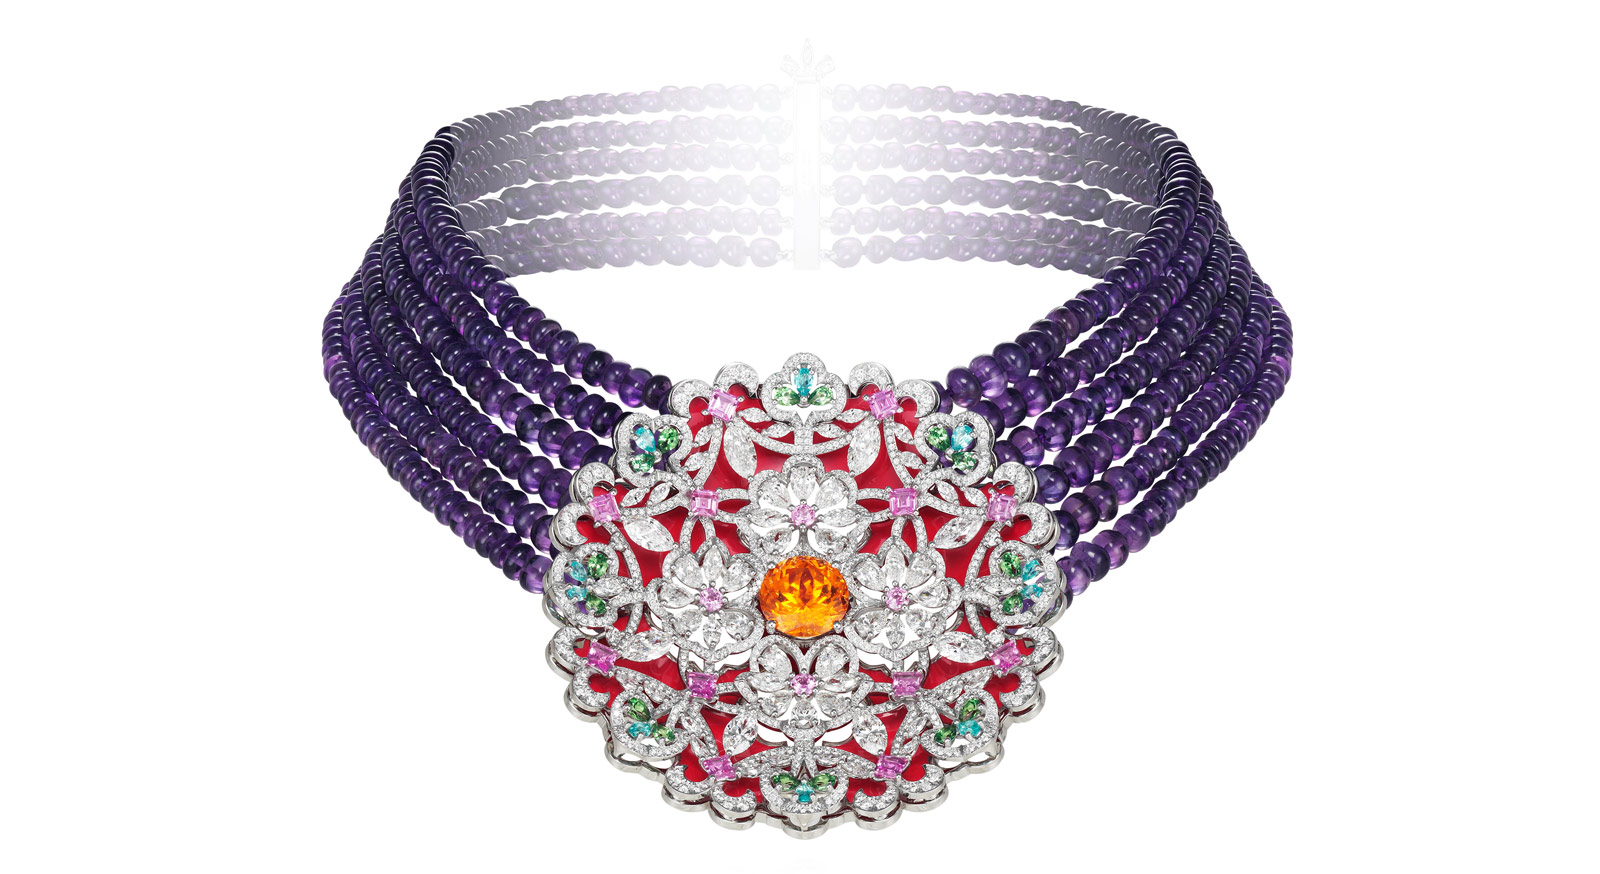 Silk Road necklace by Chopard created in collaboration with Guo Pei